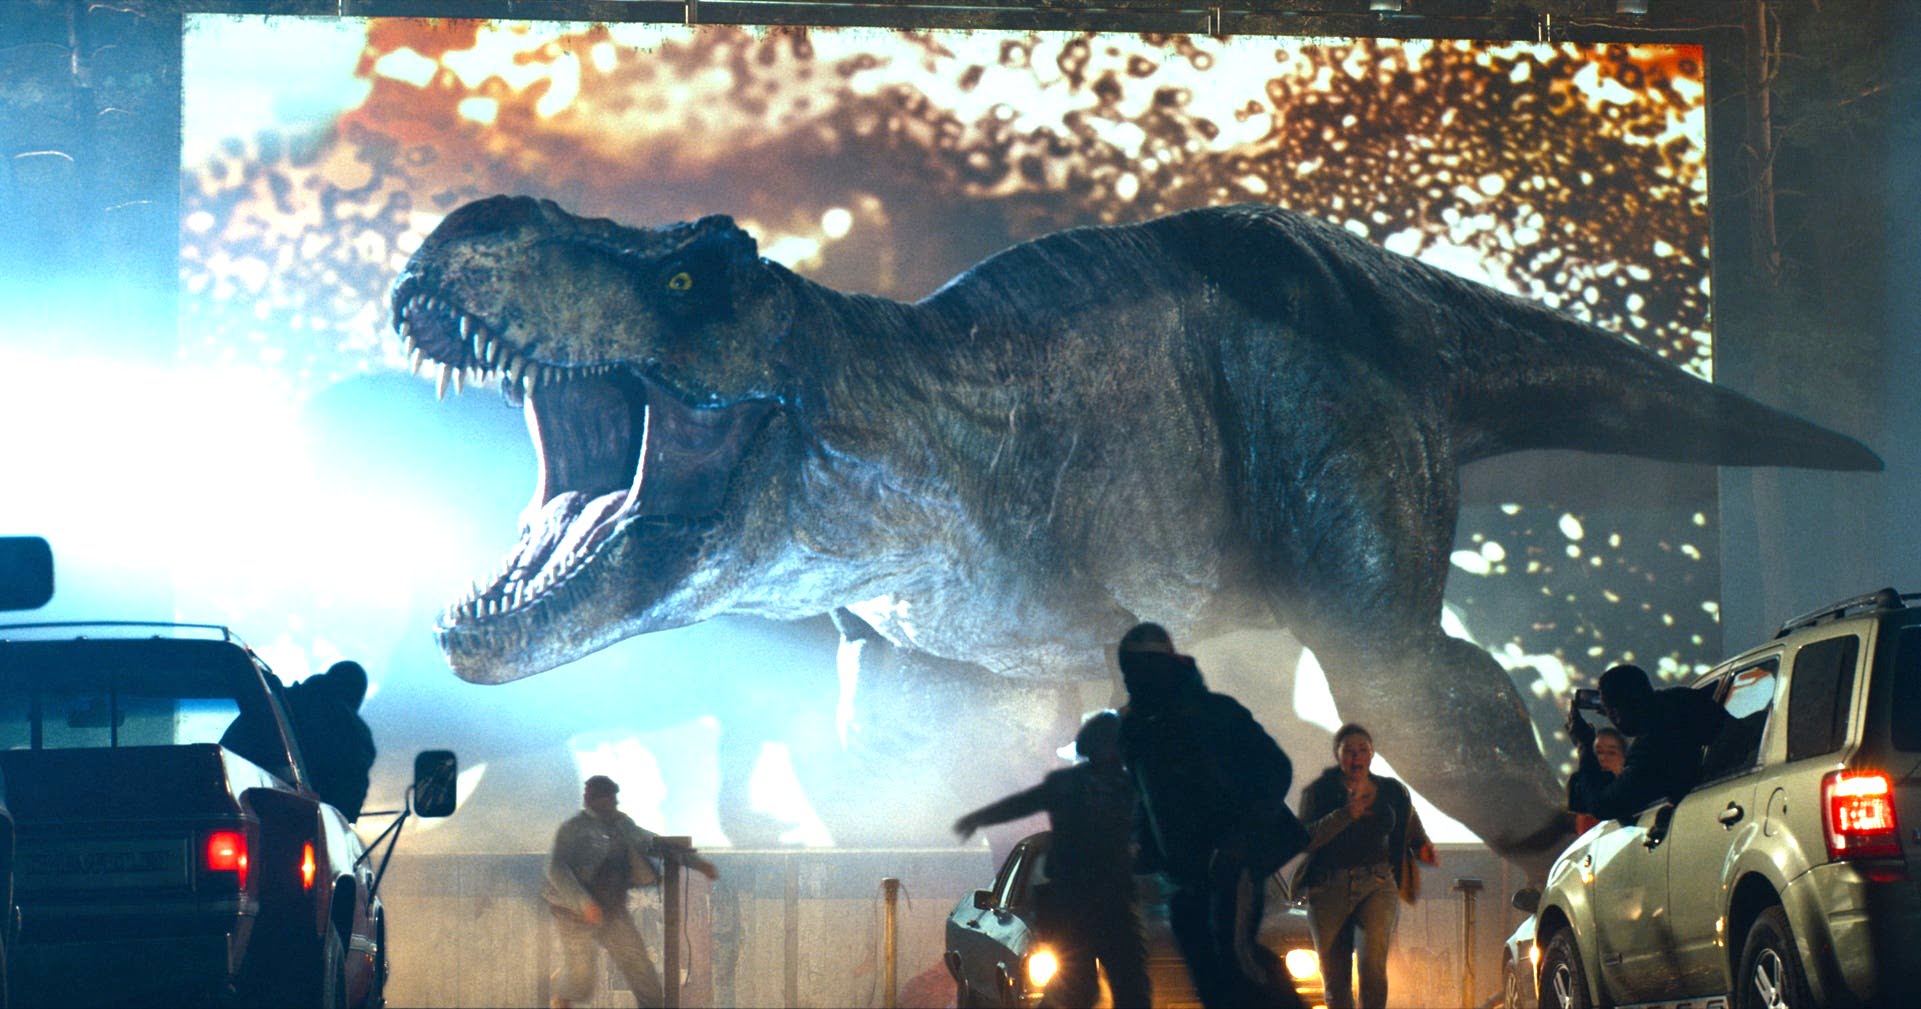 T-Rex causes havoc at a drive in movie theater